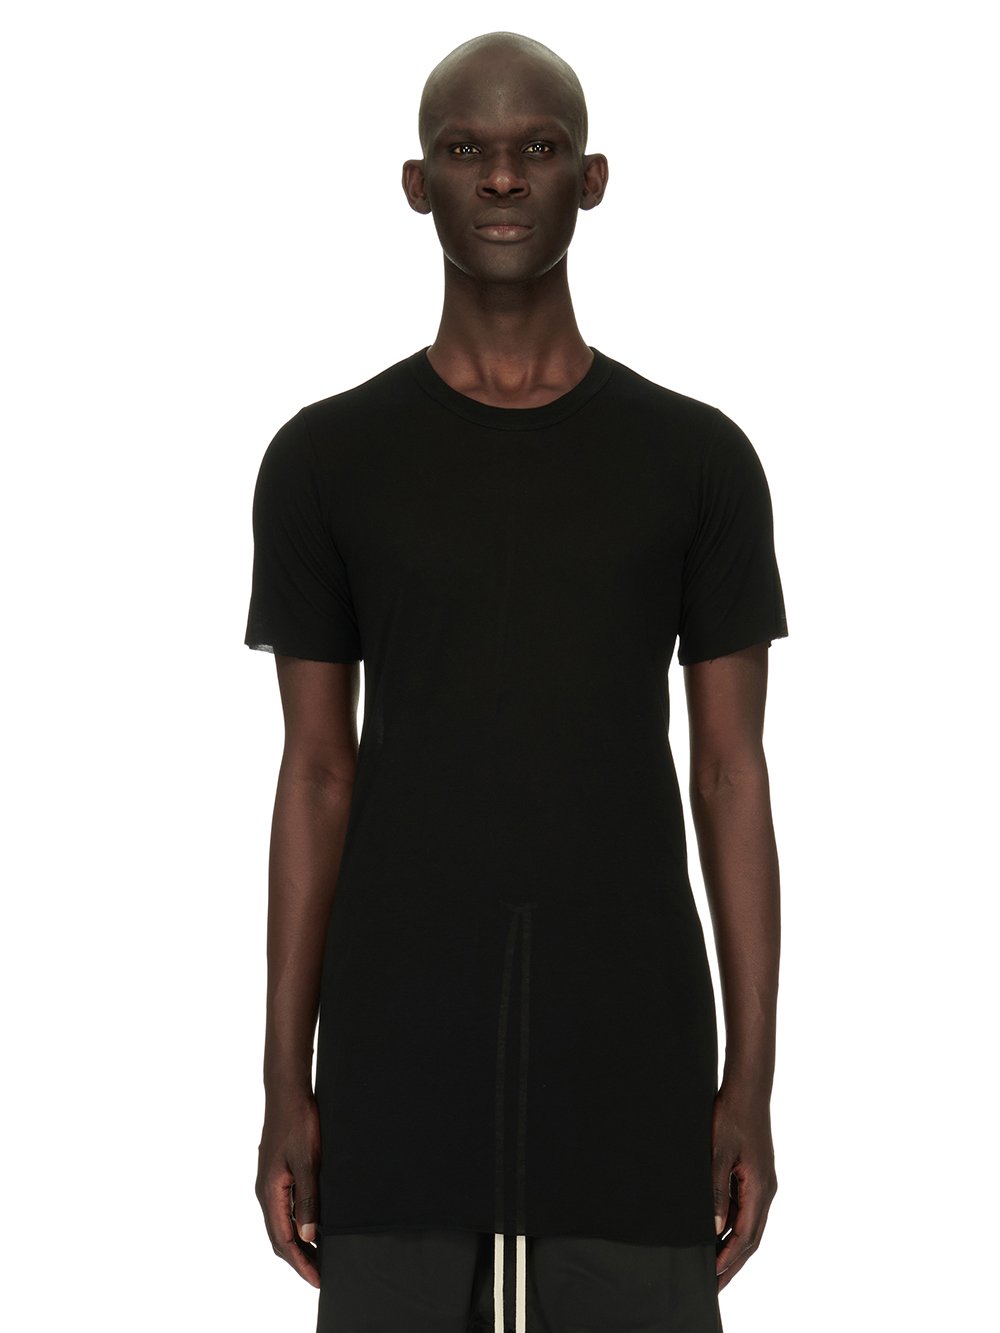 RICK OWENS FW23 LUXOR BASIC SS T IN BROWN VISCOSE SILK JERSEY